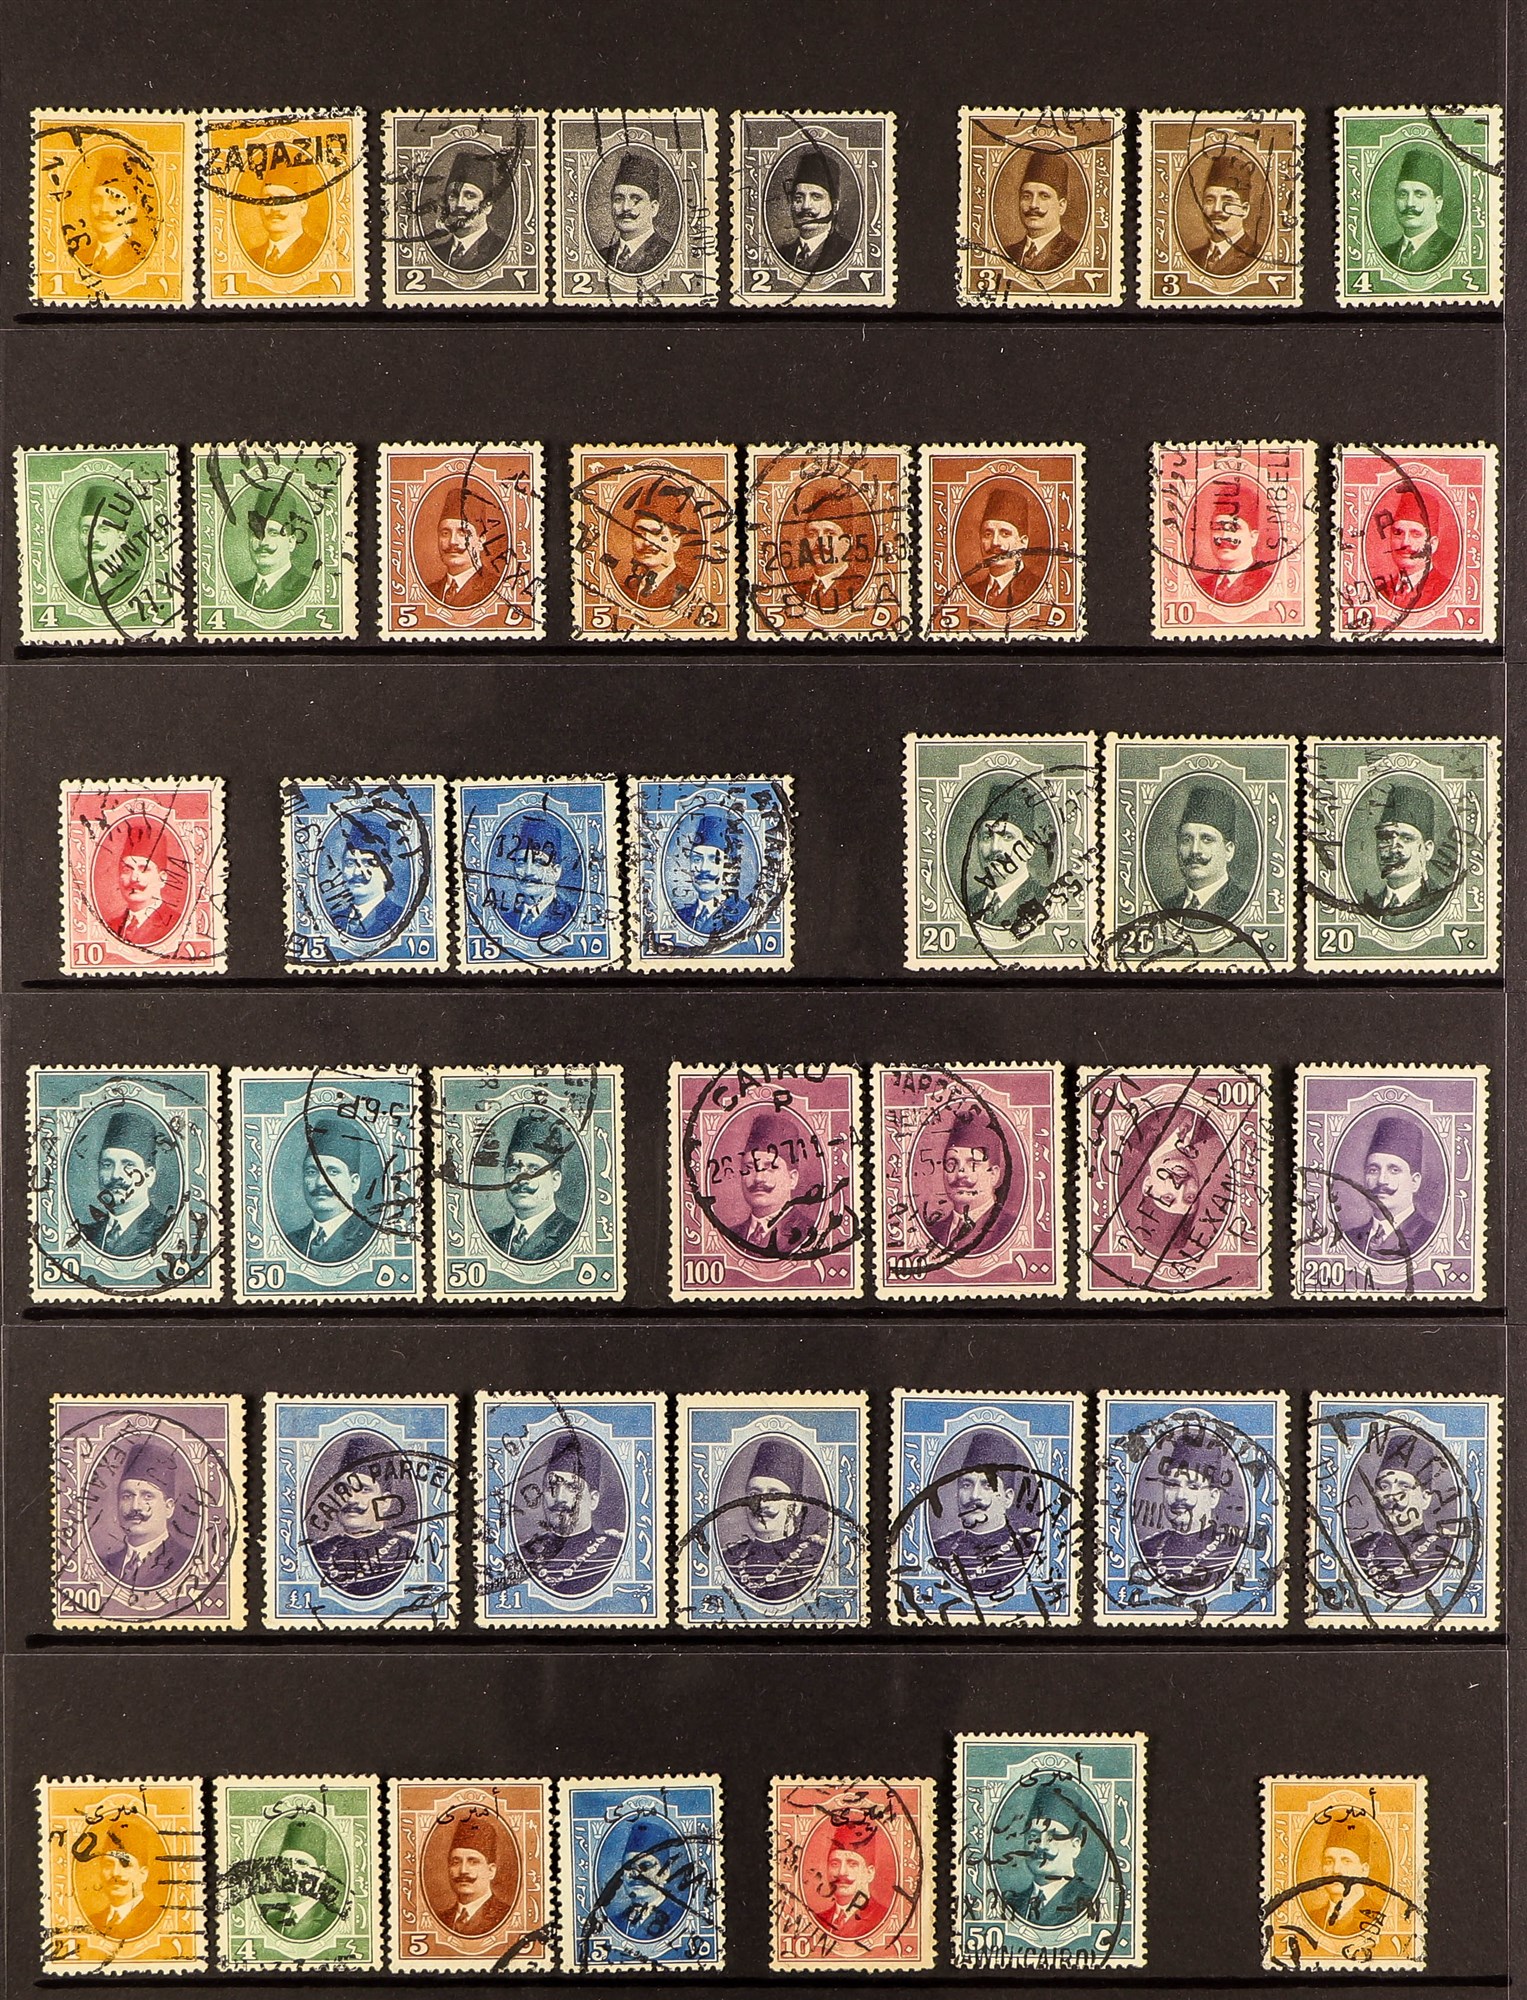 EGYPT 1923-25 a used collection of King Faud definitive stamps includes the complete set, 100m wmk